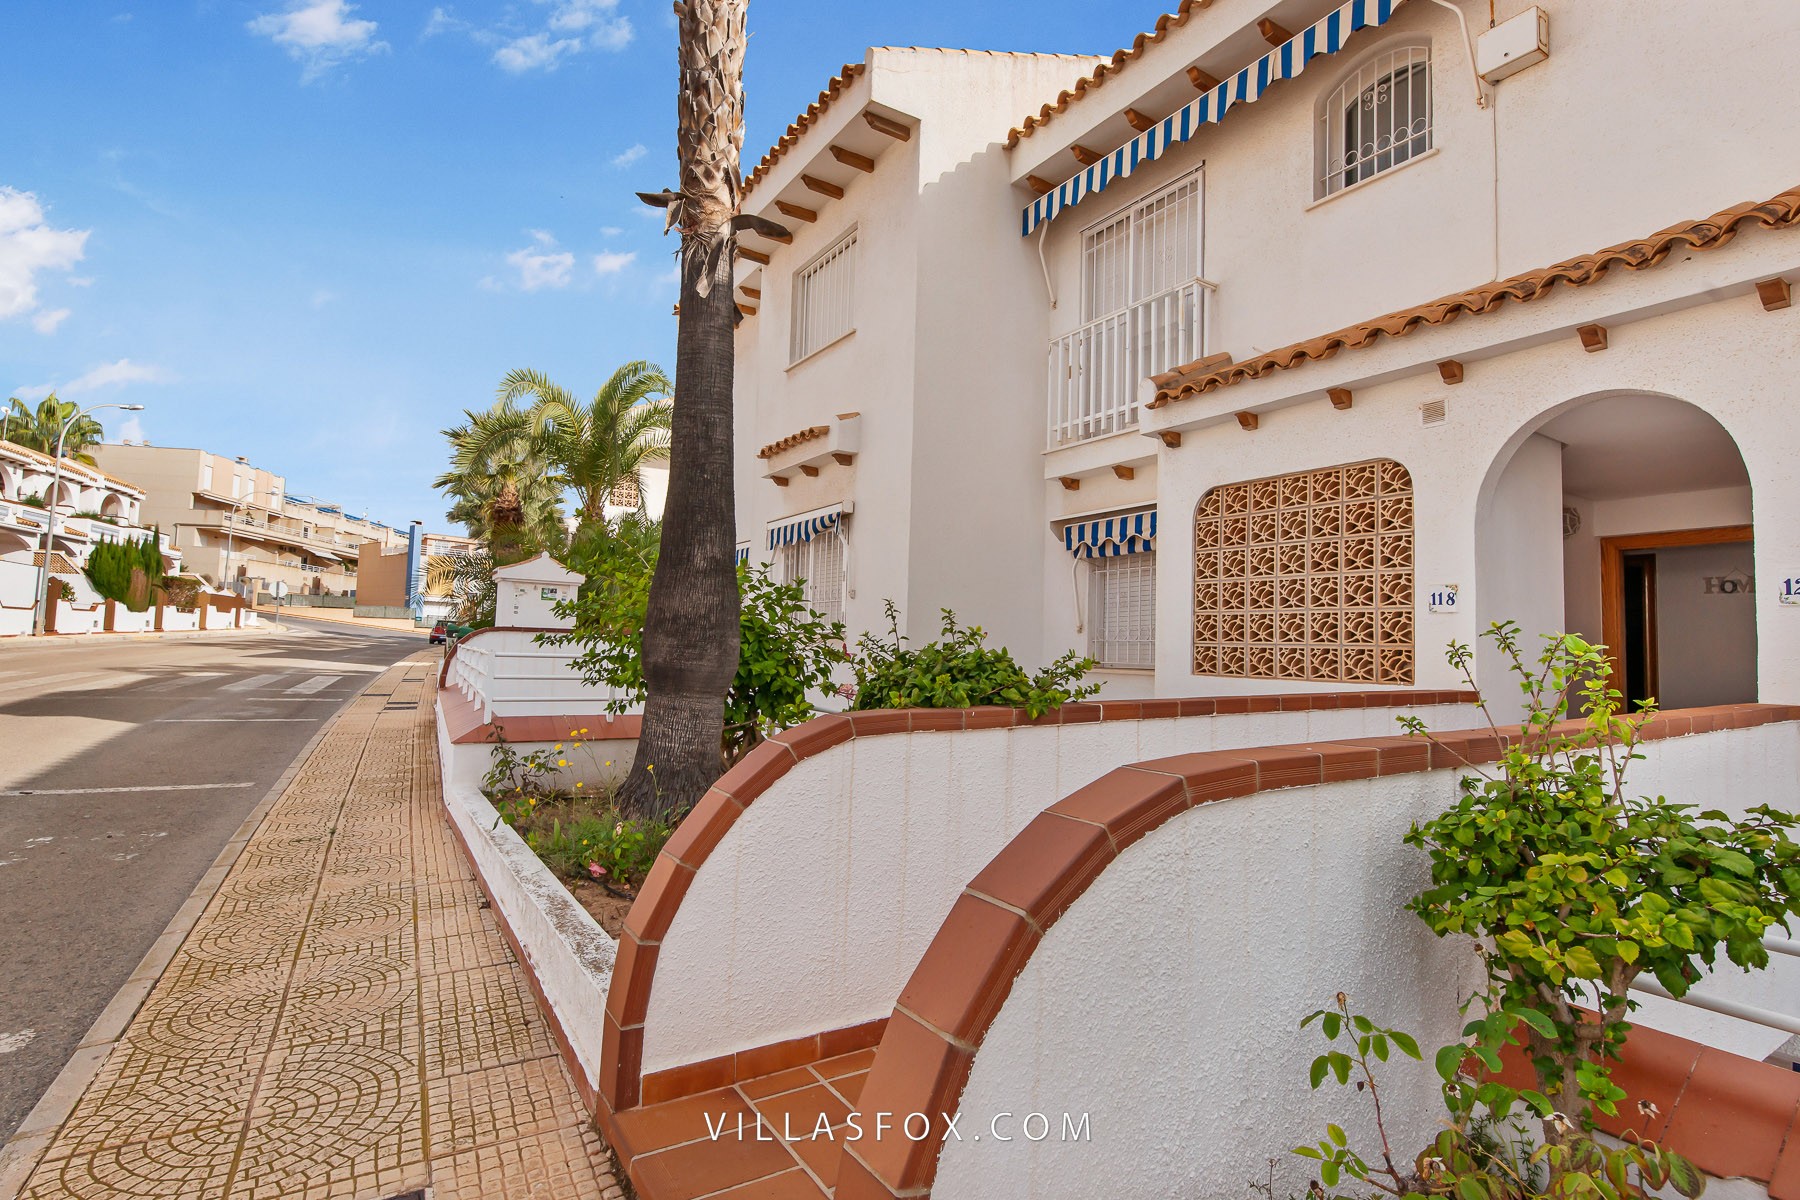 Aguamarina 3-bedroom townhouse close to the beach with 2 garage spaces and store room